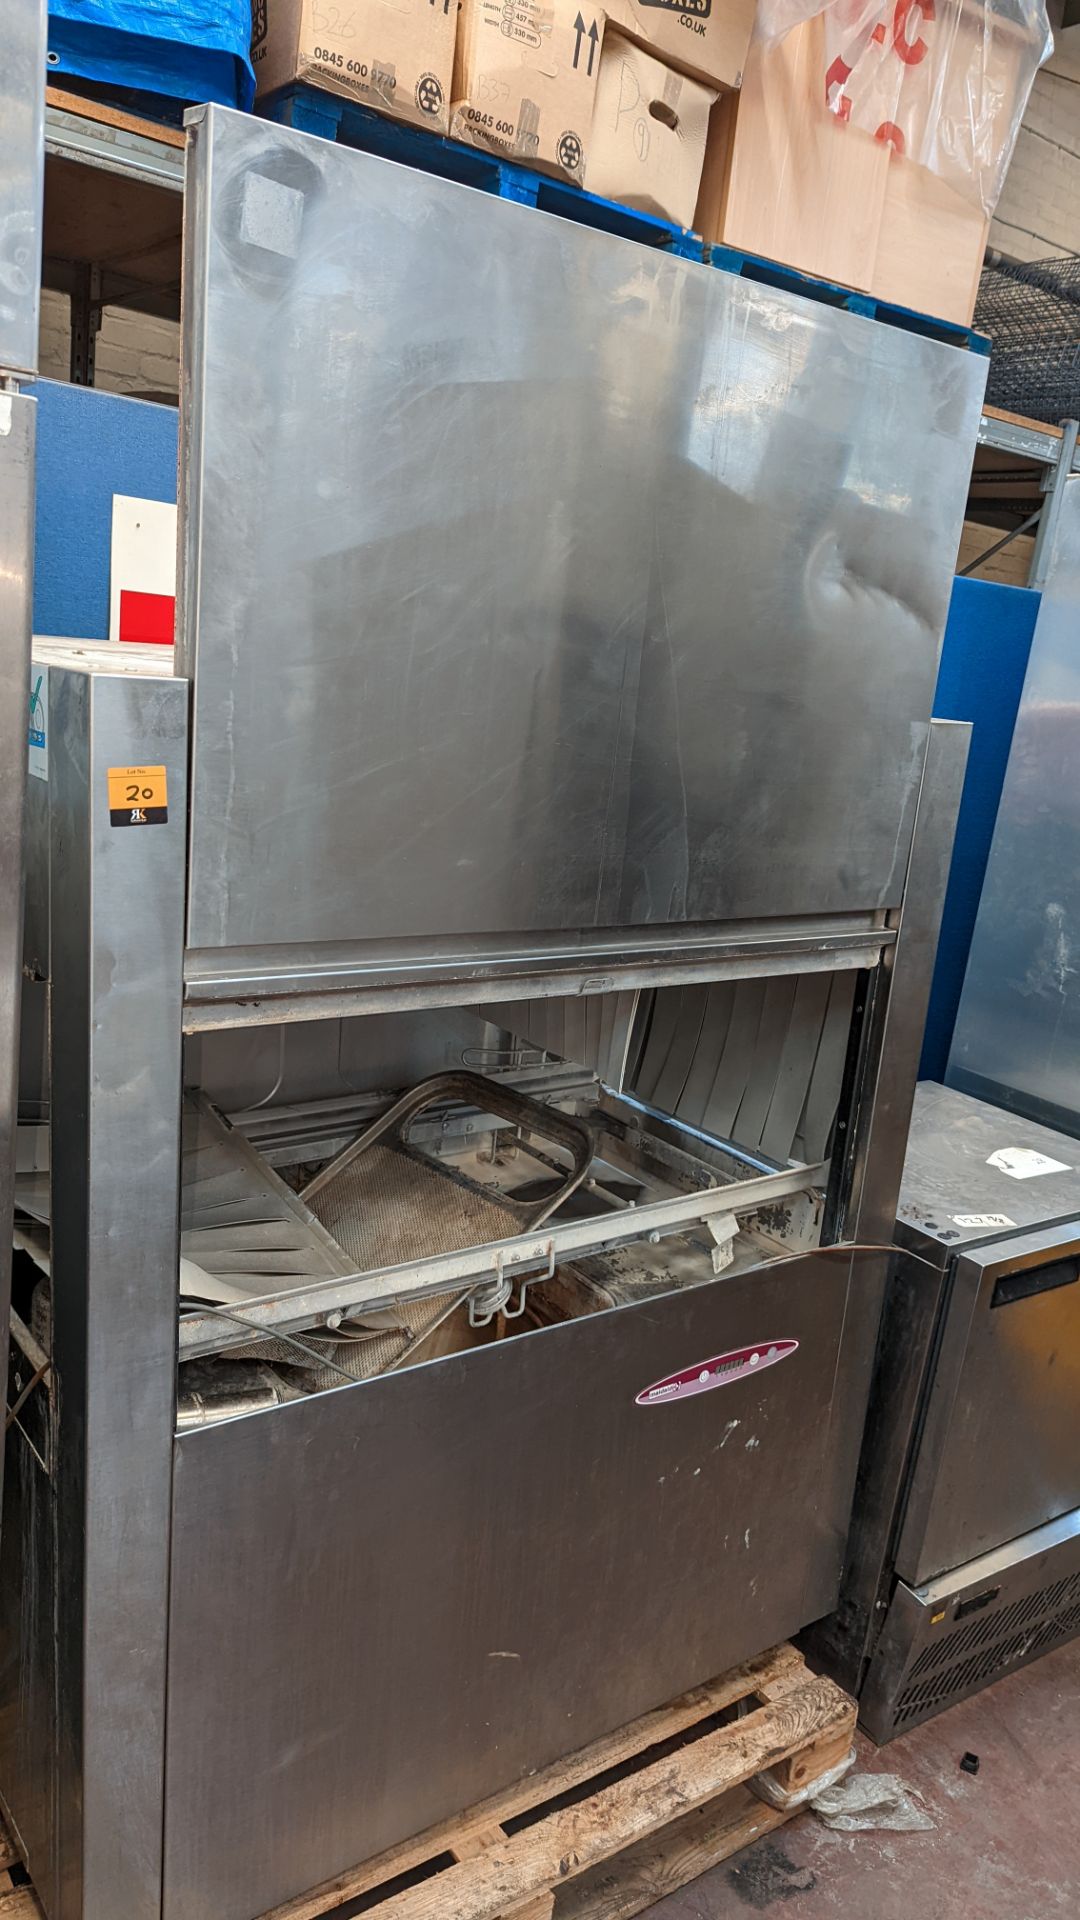 Maidaid stainless steel double width pass through dishwasher - Image 2 of 7